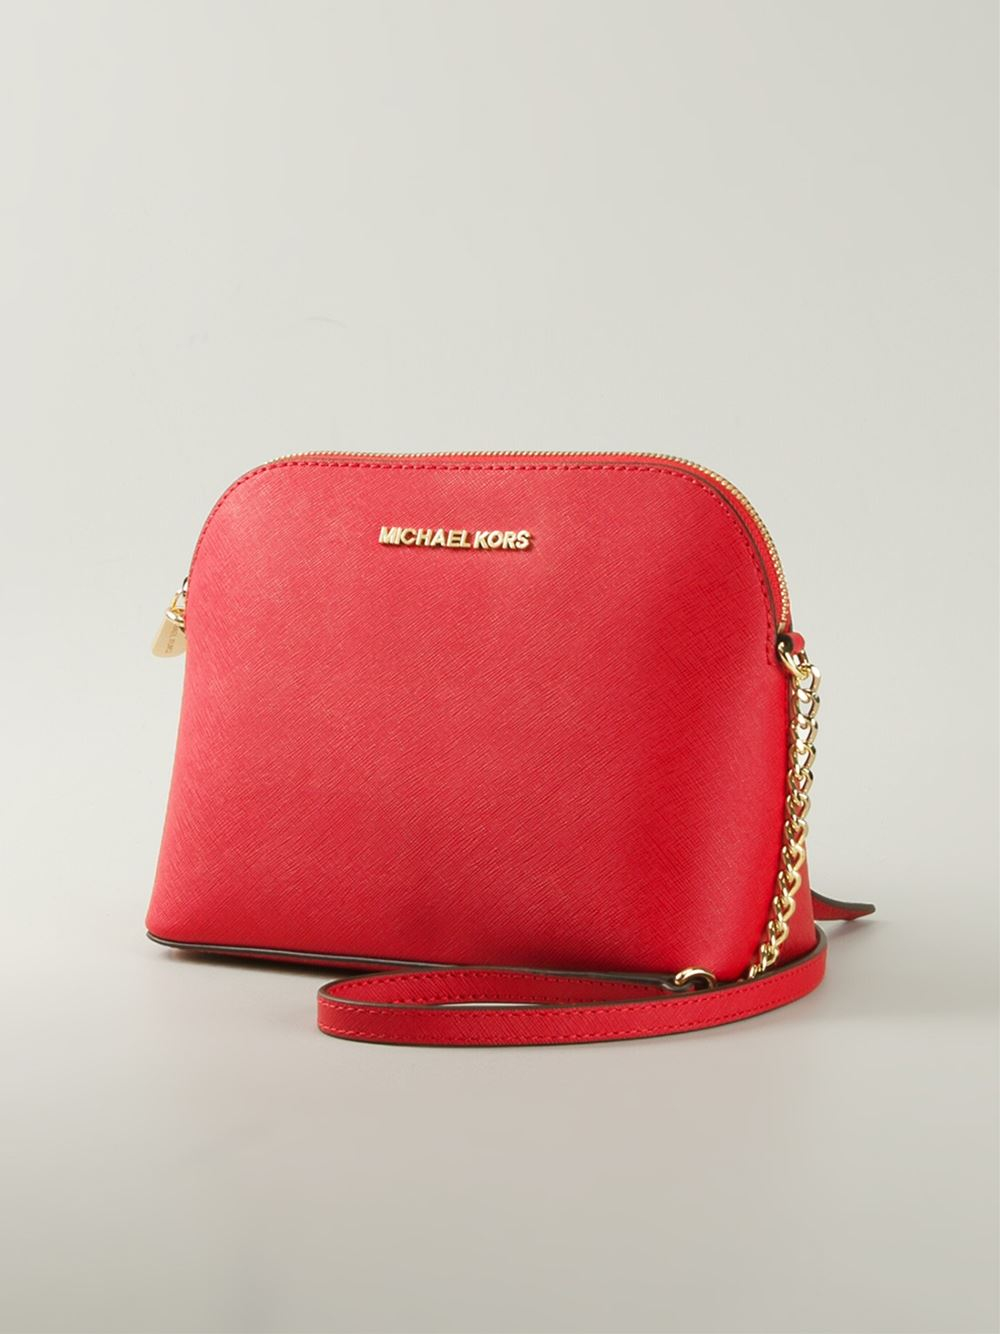 Michael Kors Cindy Large Calf-Leather Cross-Body Bag in Red